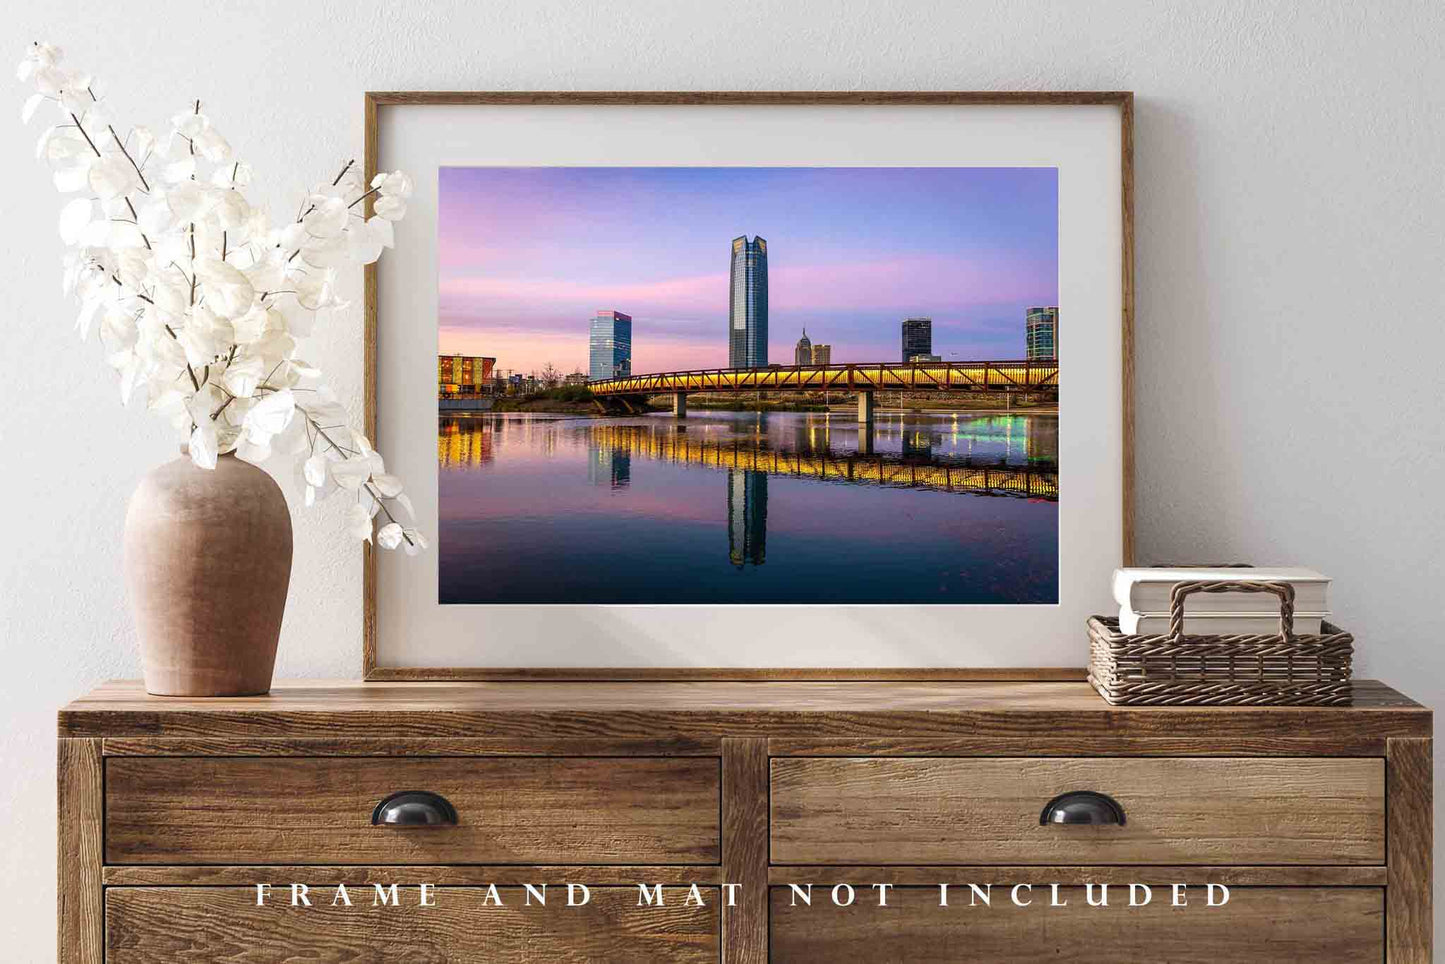 Urban Photography Print - Picture of Oklahoma City Skyline at Sunset in Scissortail Park - Architecture Wall Art Building Photo Decor